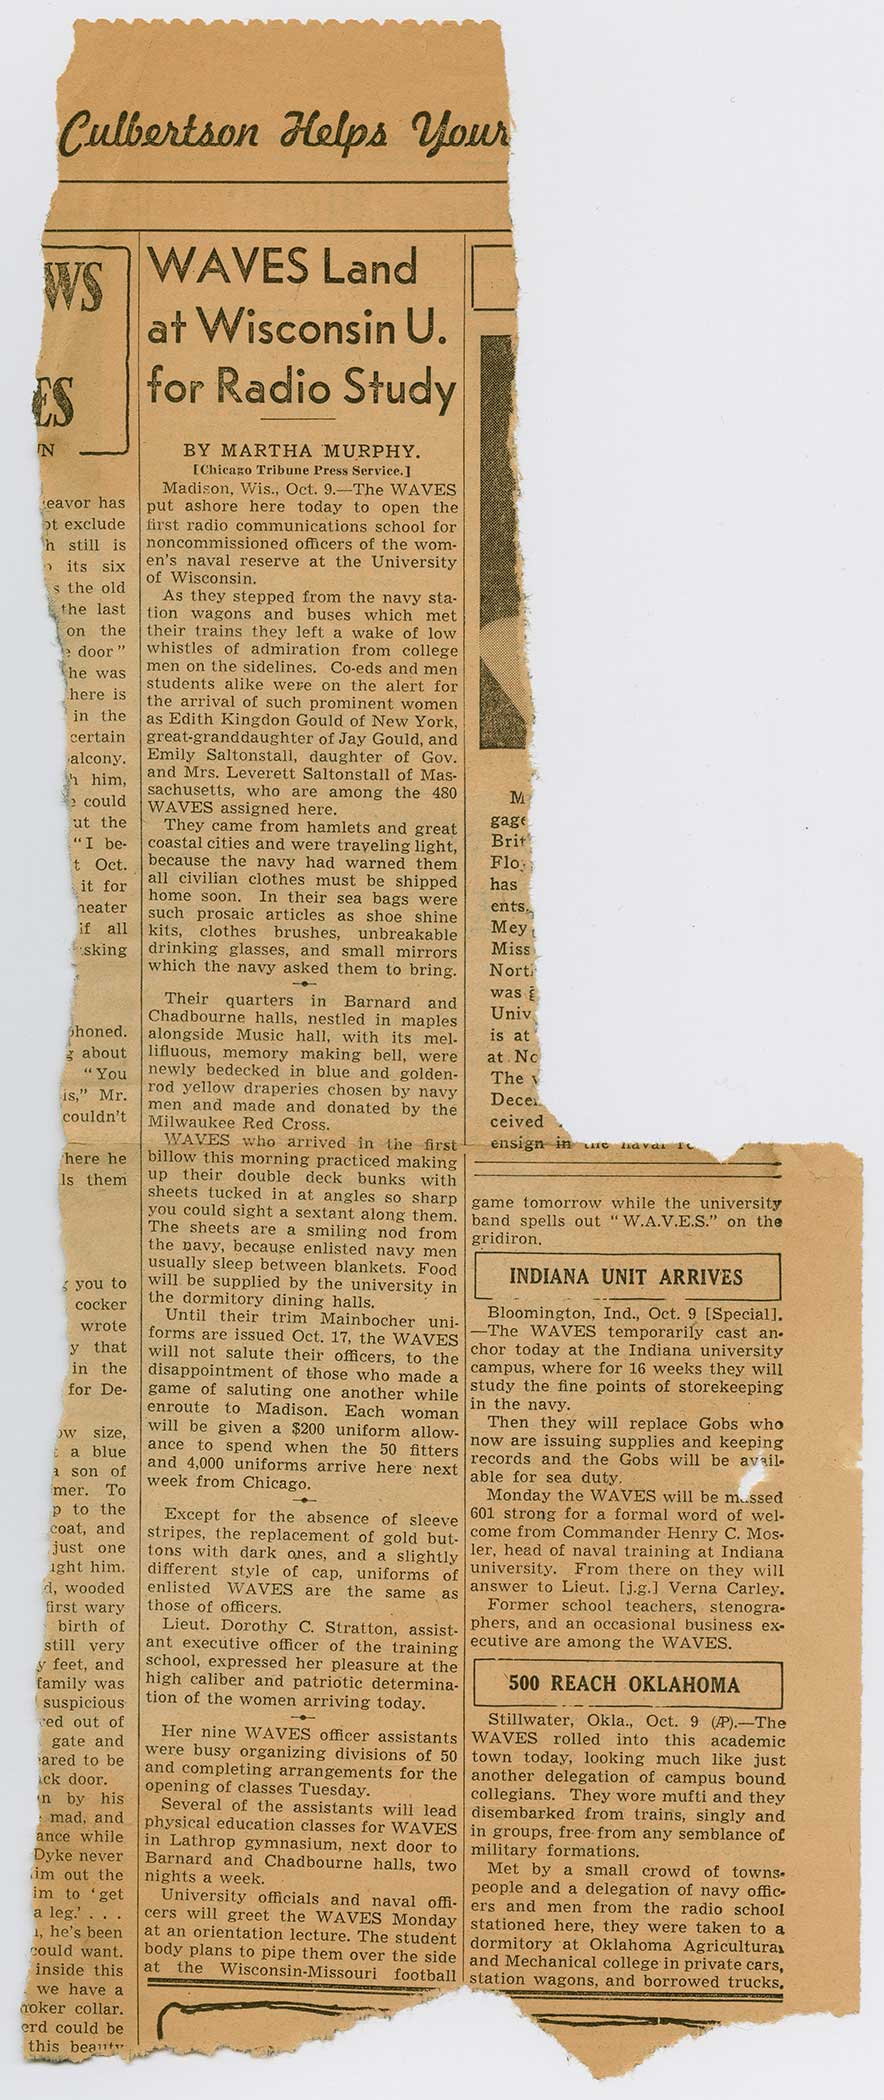 A newspaper clipping, showing an article titled Waves Land, under it a long column of text.